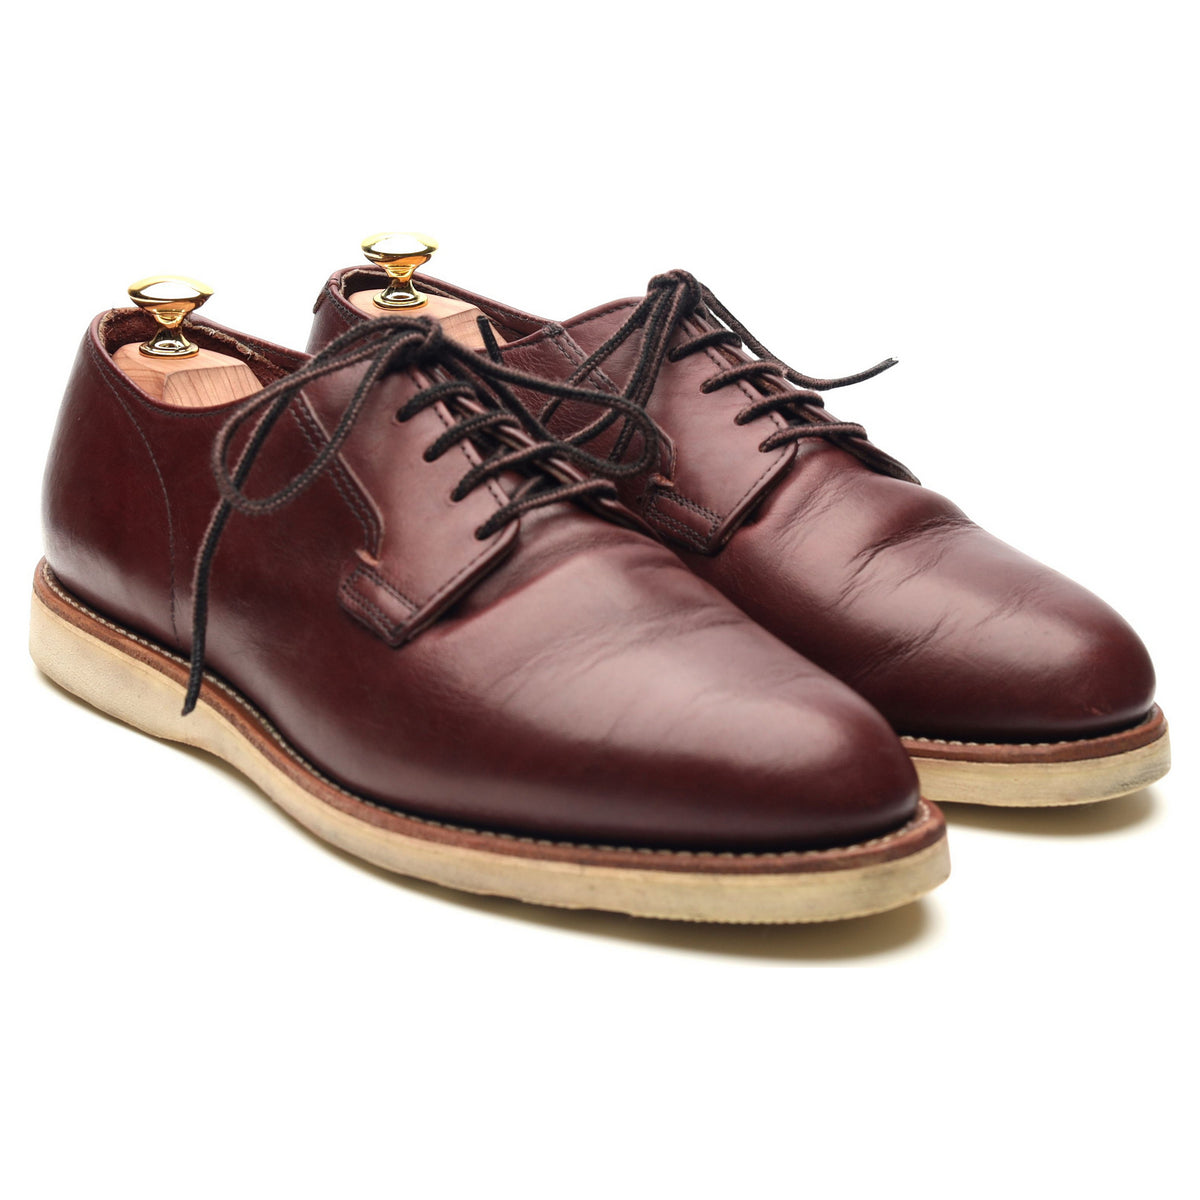 3117 Postman Oxford' Burgundy Leather Derby Shoes UK 8 US 9 - Abbot's Shoes